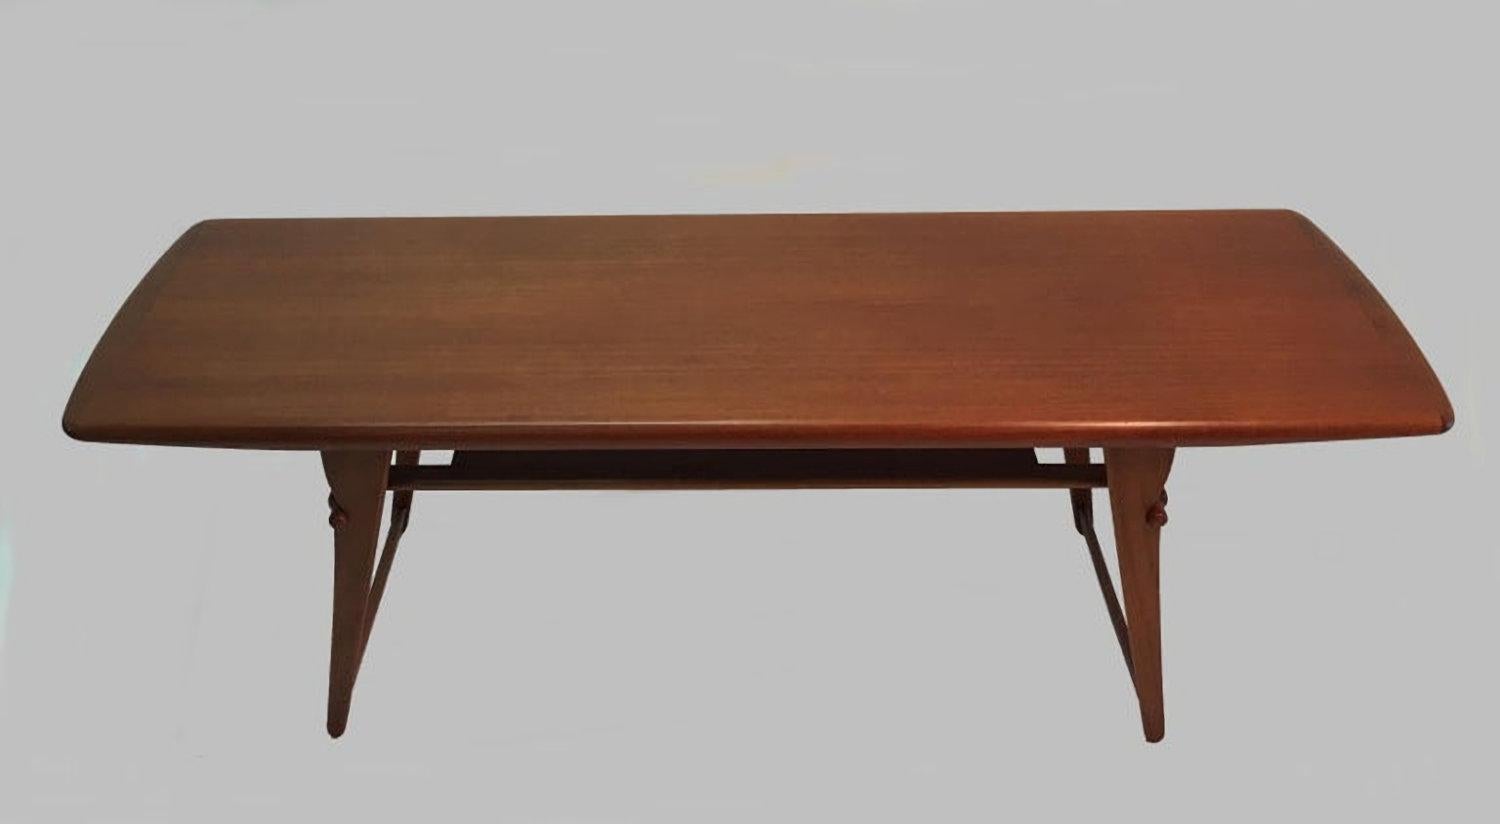 1970s Fully Restored Danish Andreas Hansen Tesk Coffee Table by Arrebo Mobler In Good Condition For Sale In Knebel, DK